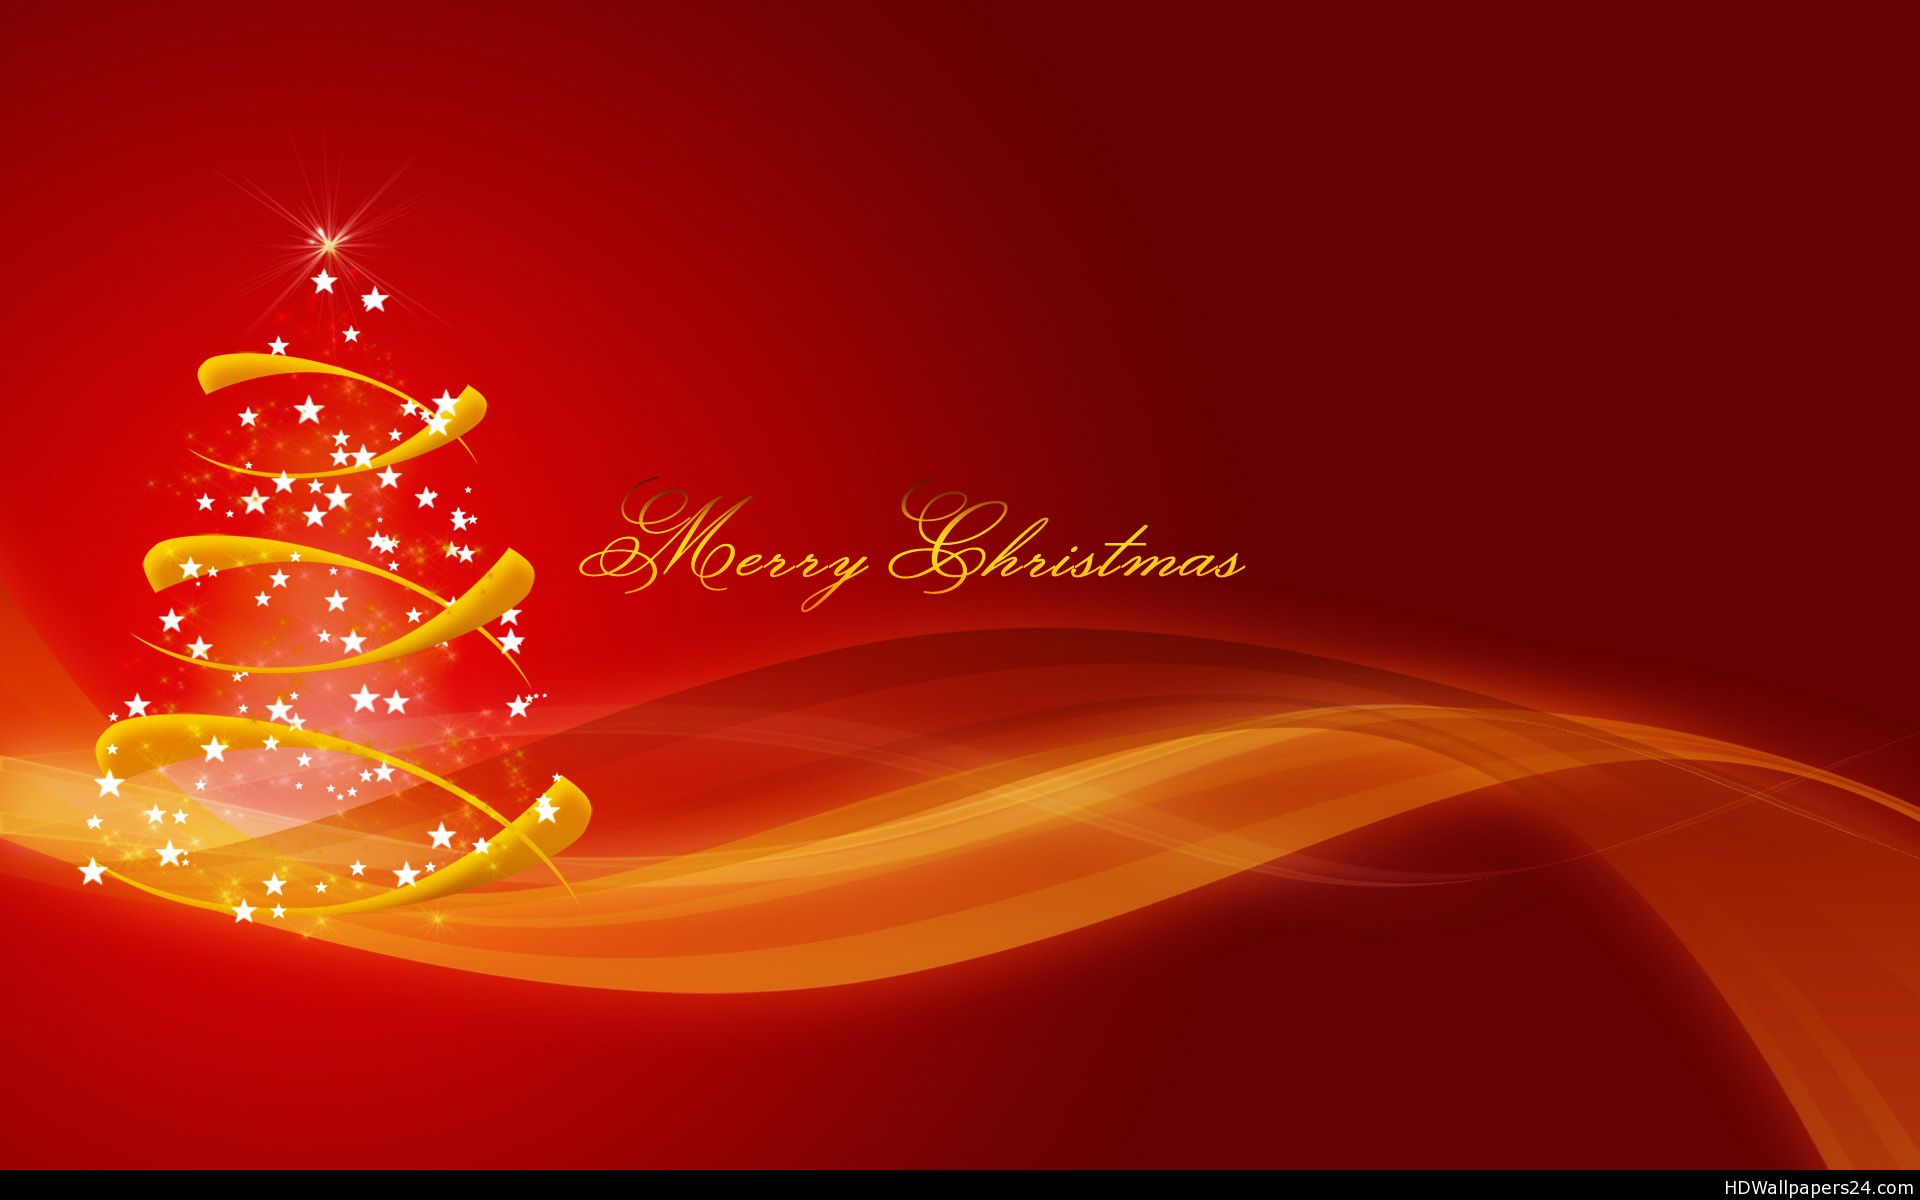 Best Merry Christmas HD Wallpaper Image Picture Free Download